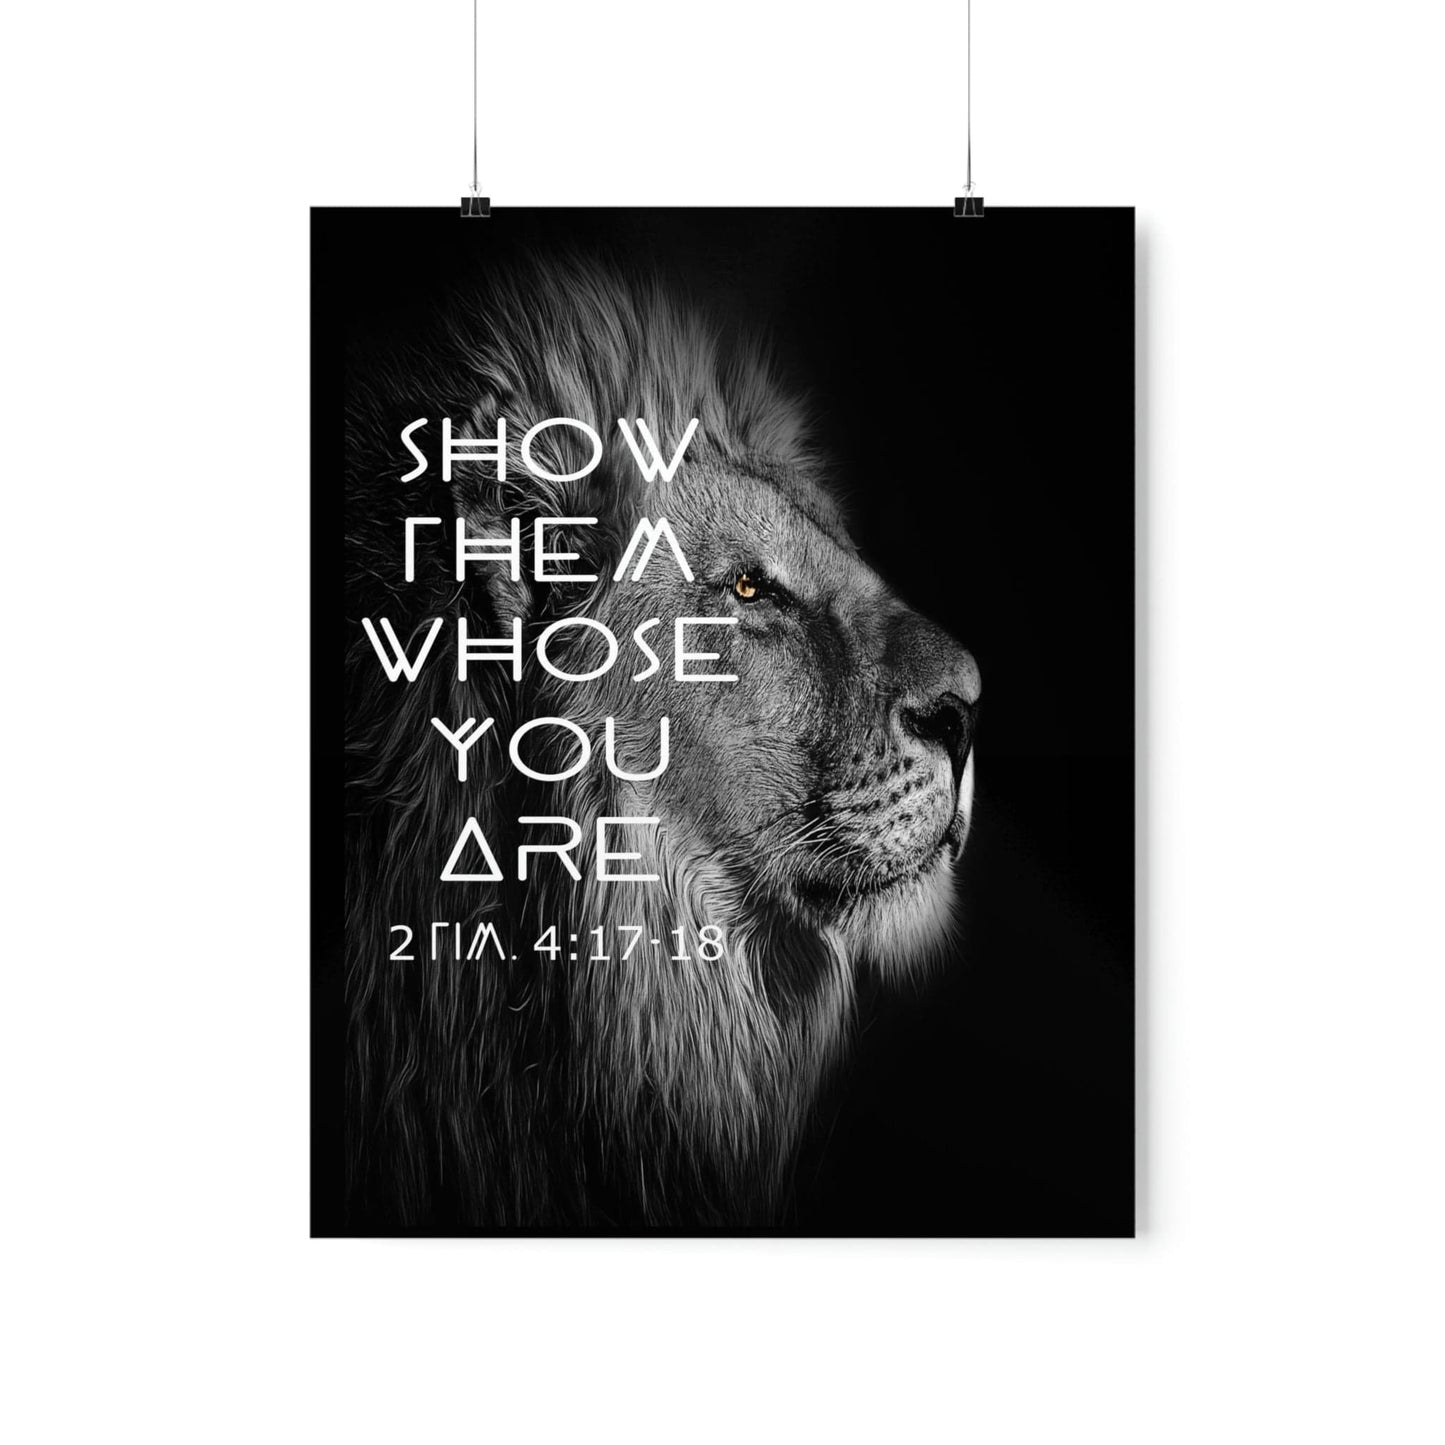 Printify Poster 16″ x 20″ / Matte Show Them Whose You Are - 2 Tim. 4:17,18 Premium Christian Bible Verse Poster